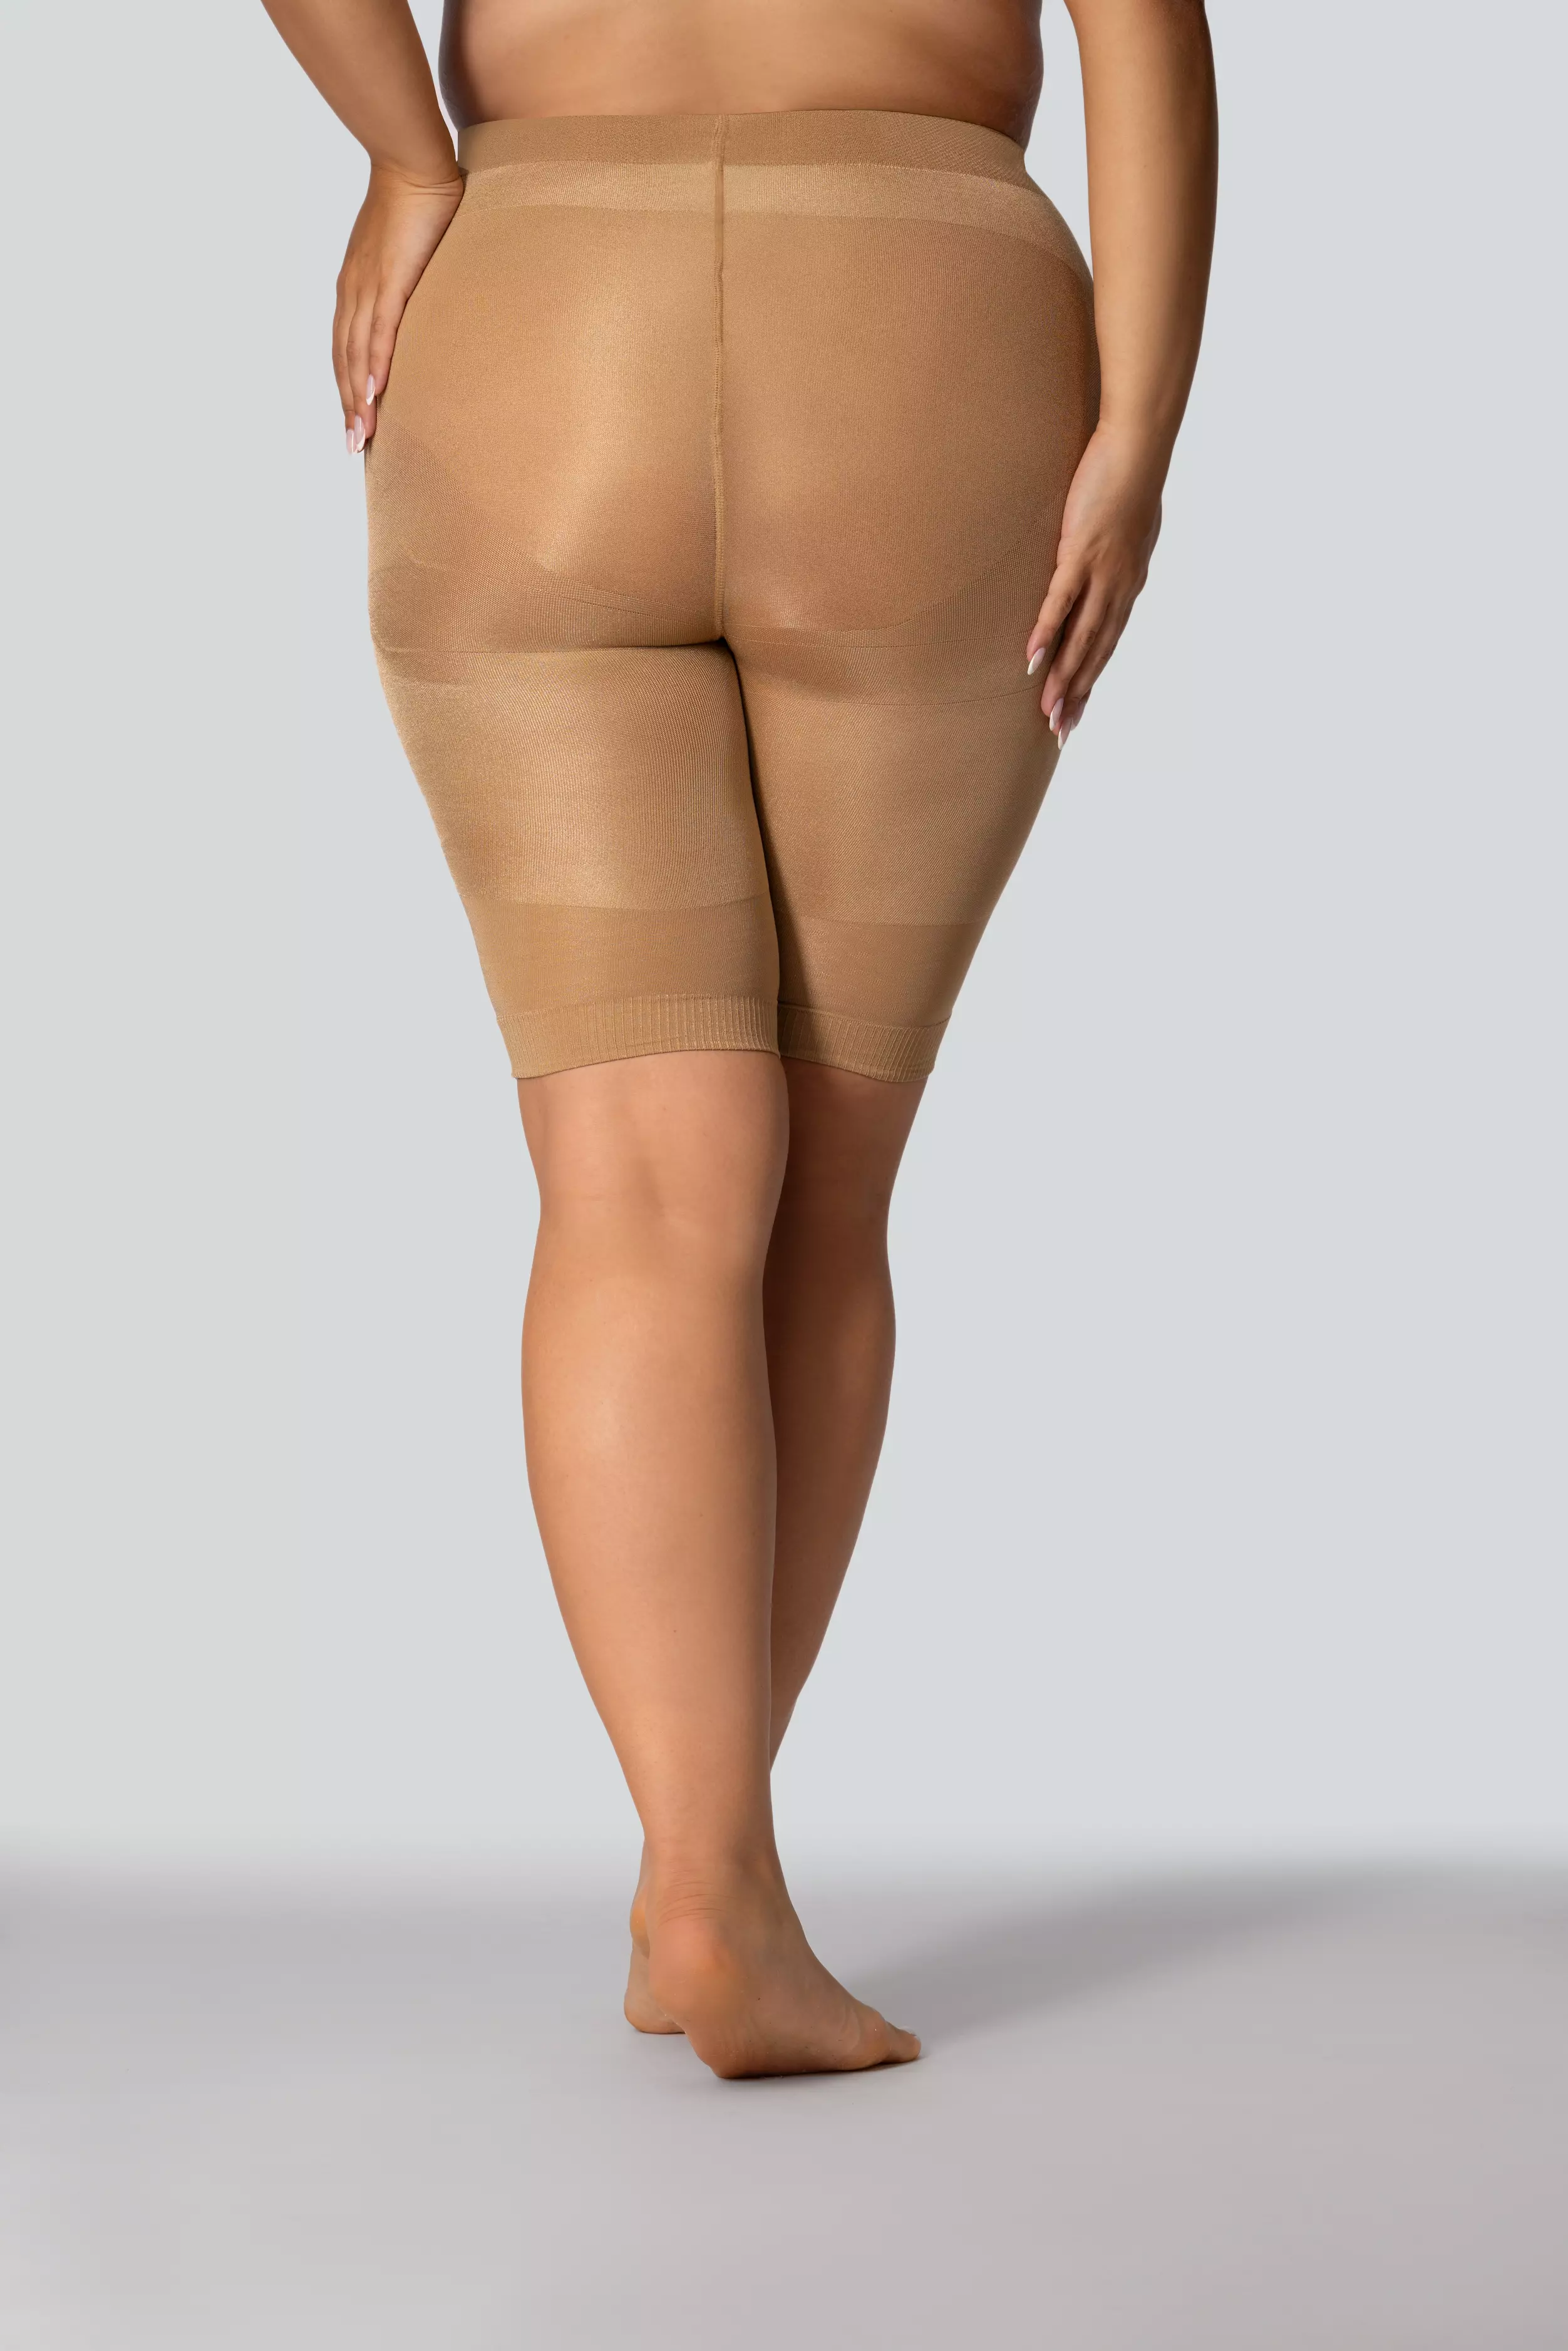 QUEEN SIZE SZORTY MID-WAISTED SMOOTHWEAR GOLDEN PEARL - 3